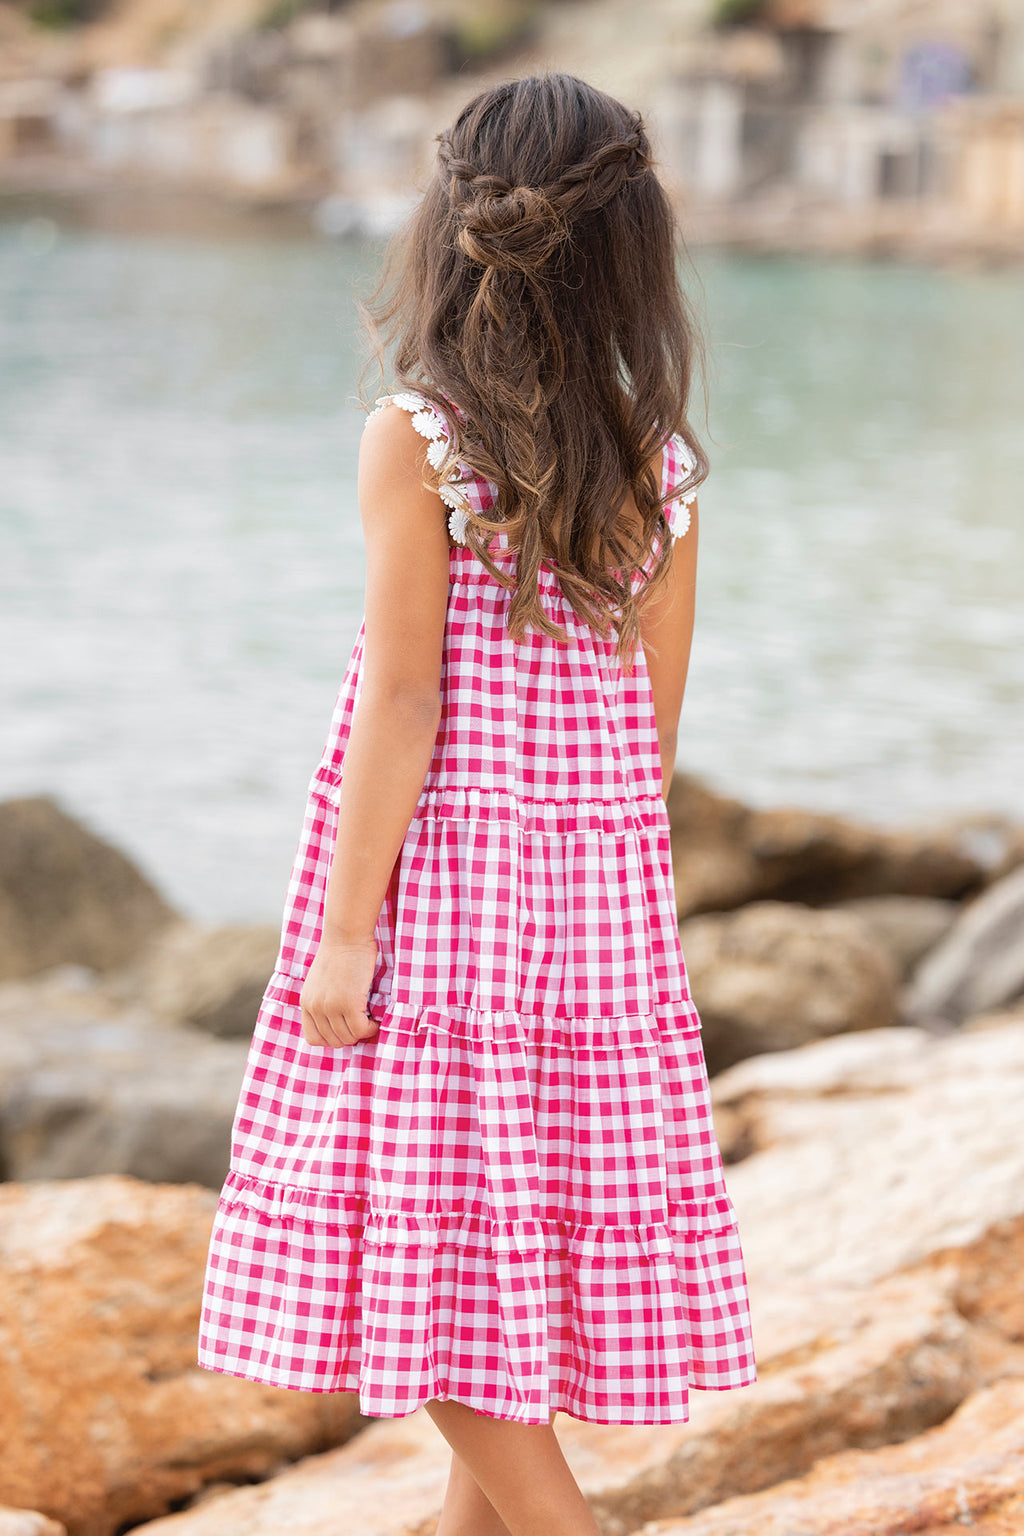 Dress - Pink Two-tone gingham